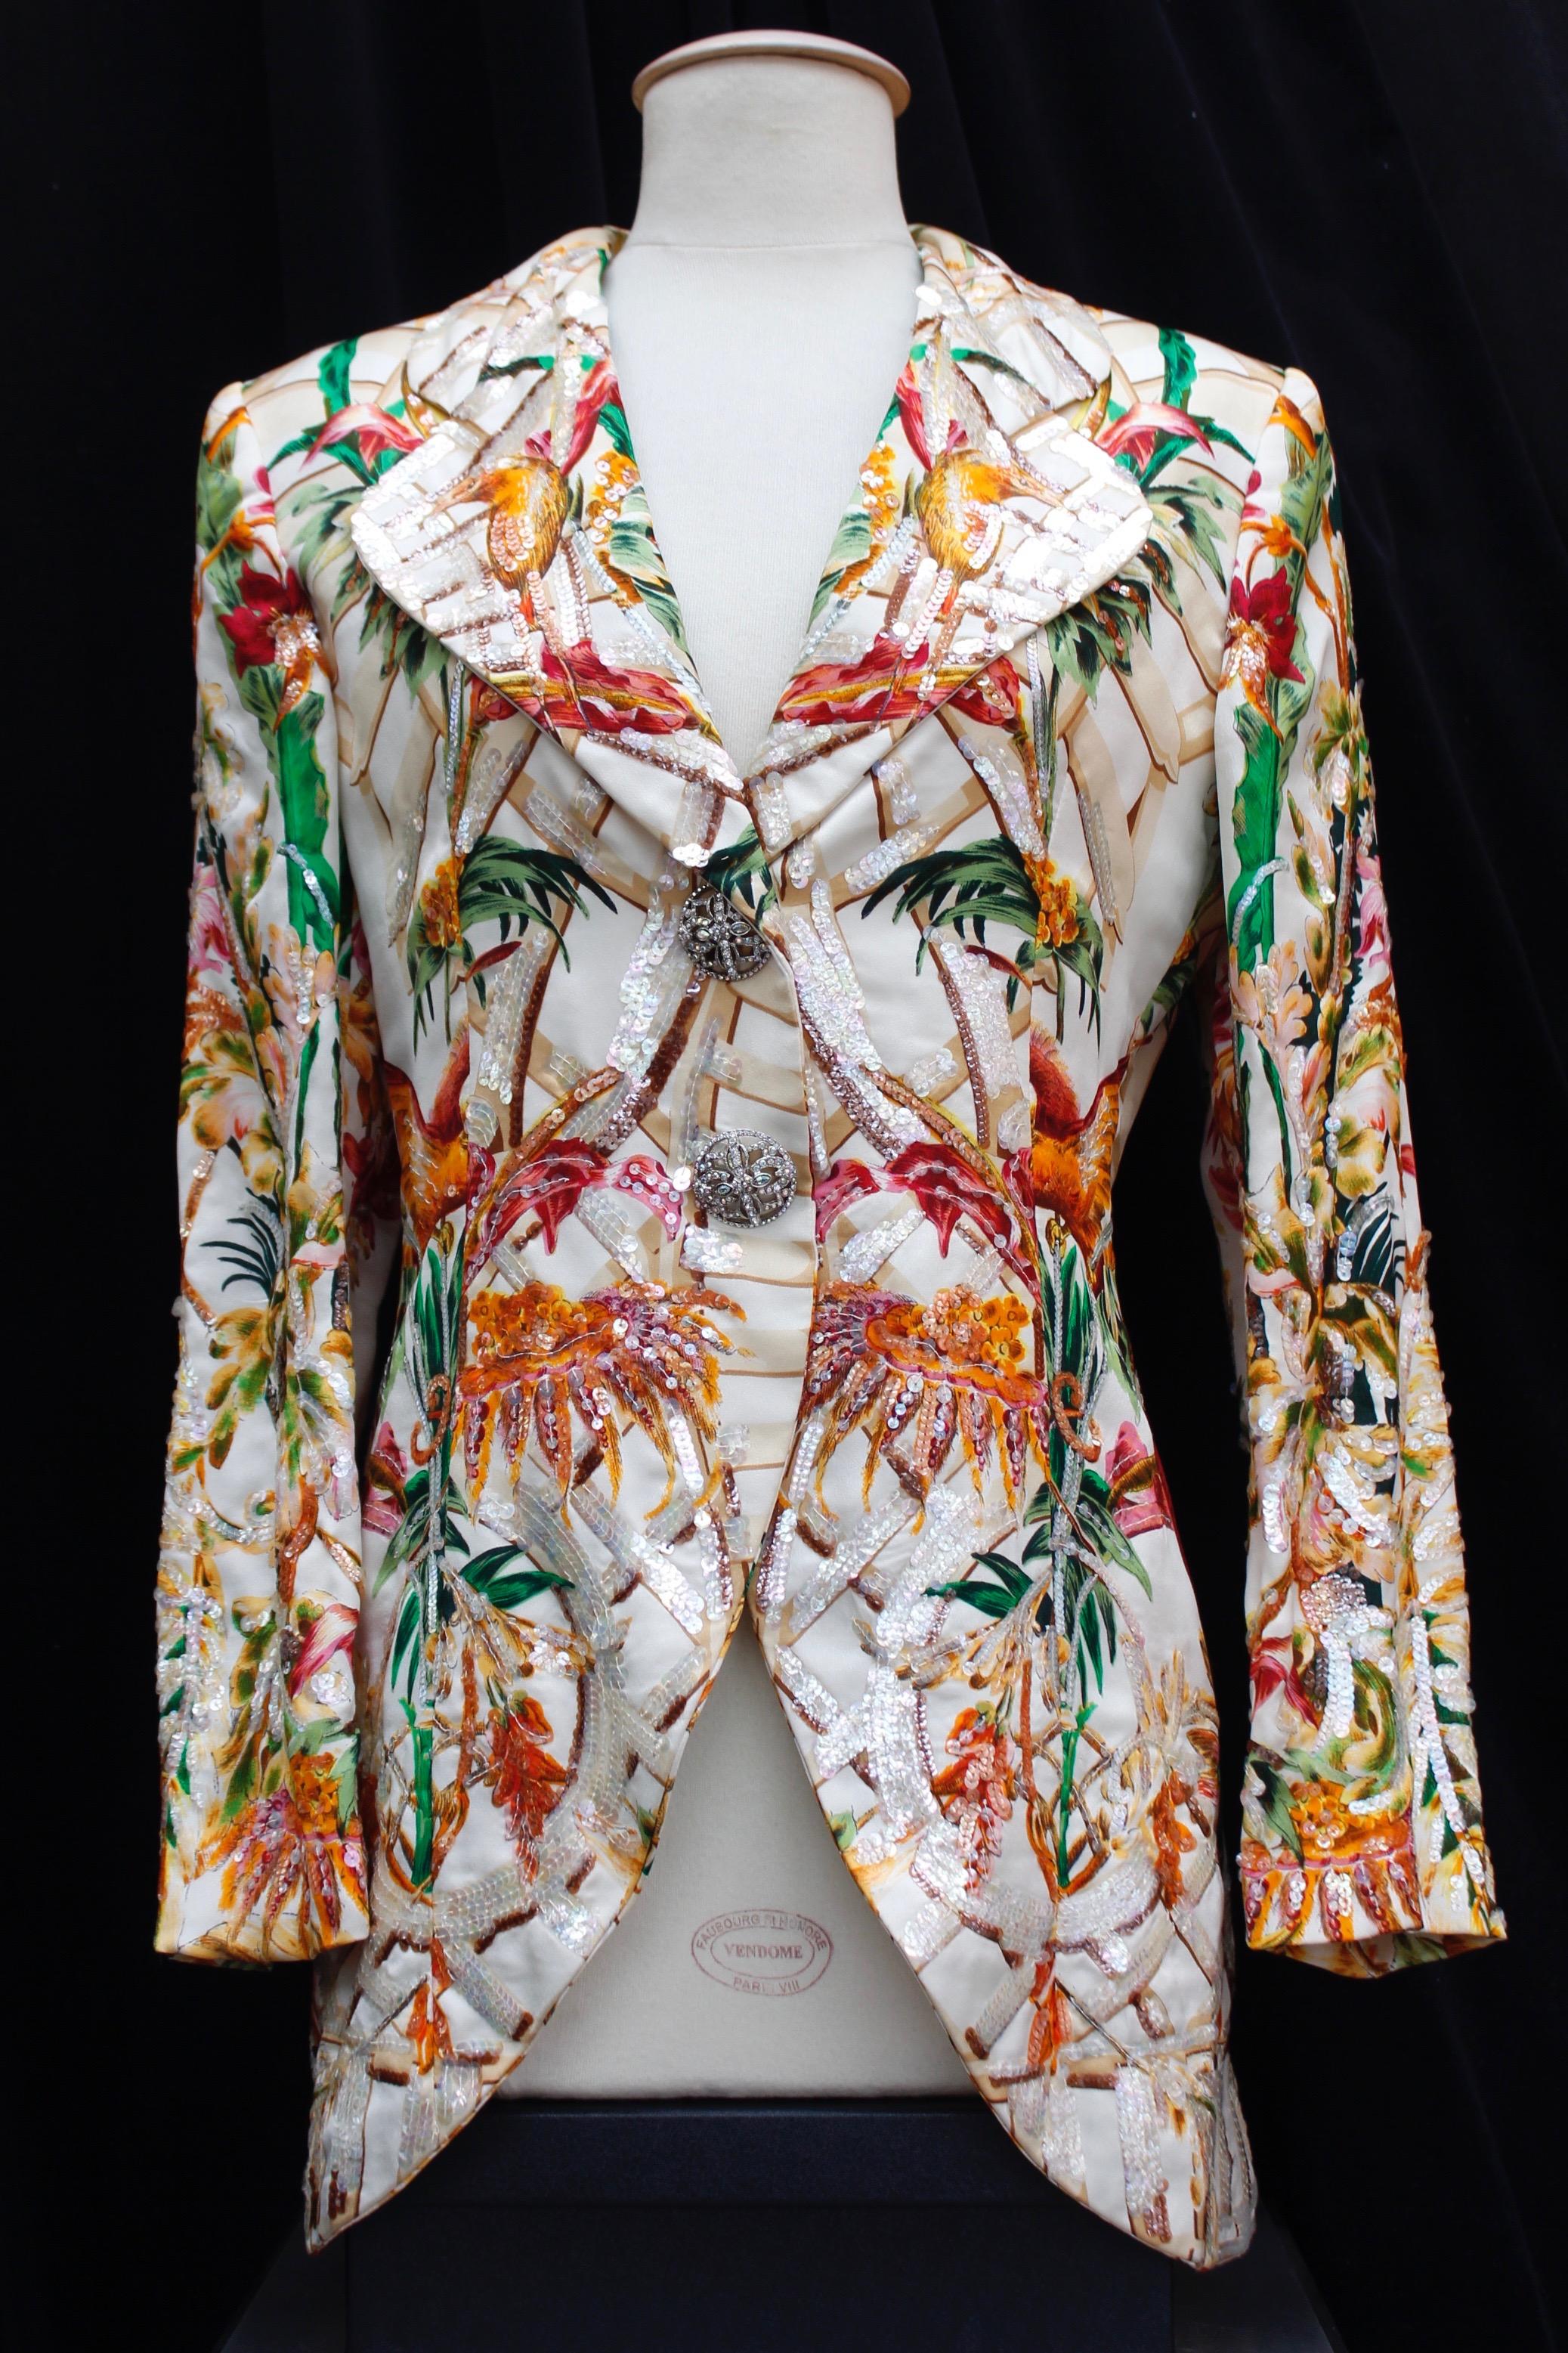 CHRISTIAN DIOR BOUTIQUE – Magnificent long sleeve jacket with tailored collar, composed of off-white silk printed with flowers, trellis and birds pattern in yellow, green, pink, brown, orange and red colors. Some parts are embroidered with pearly